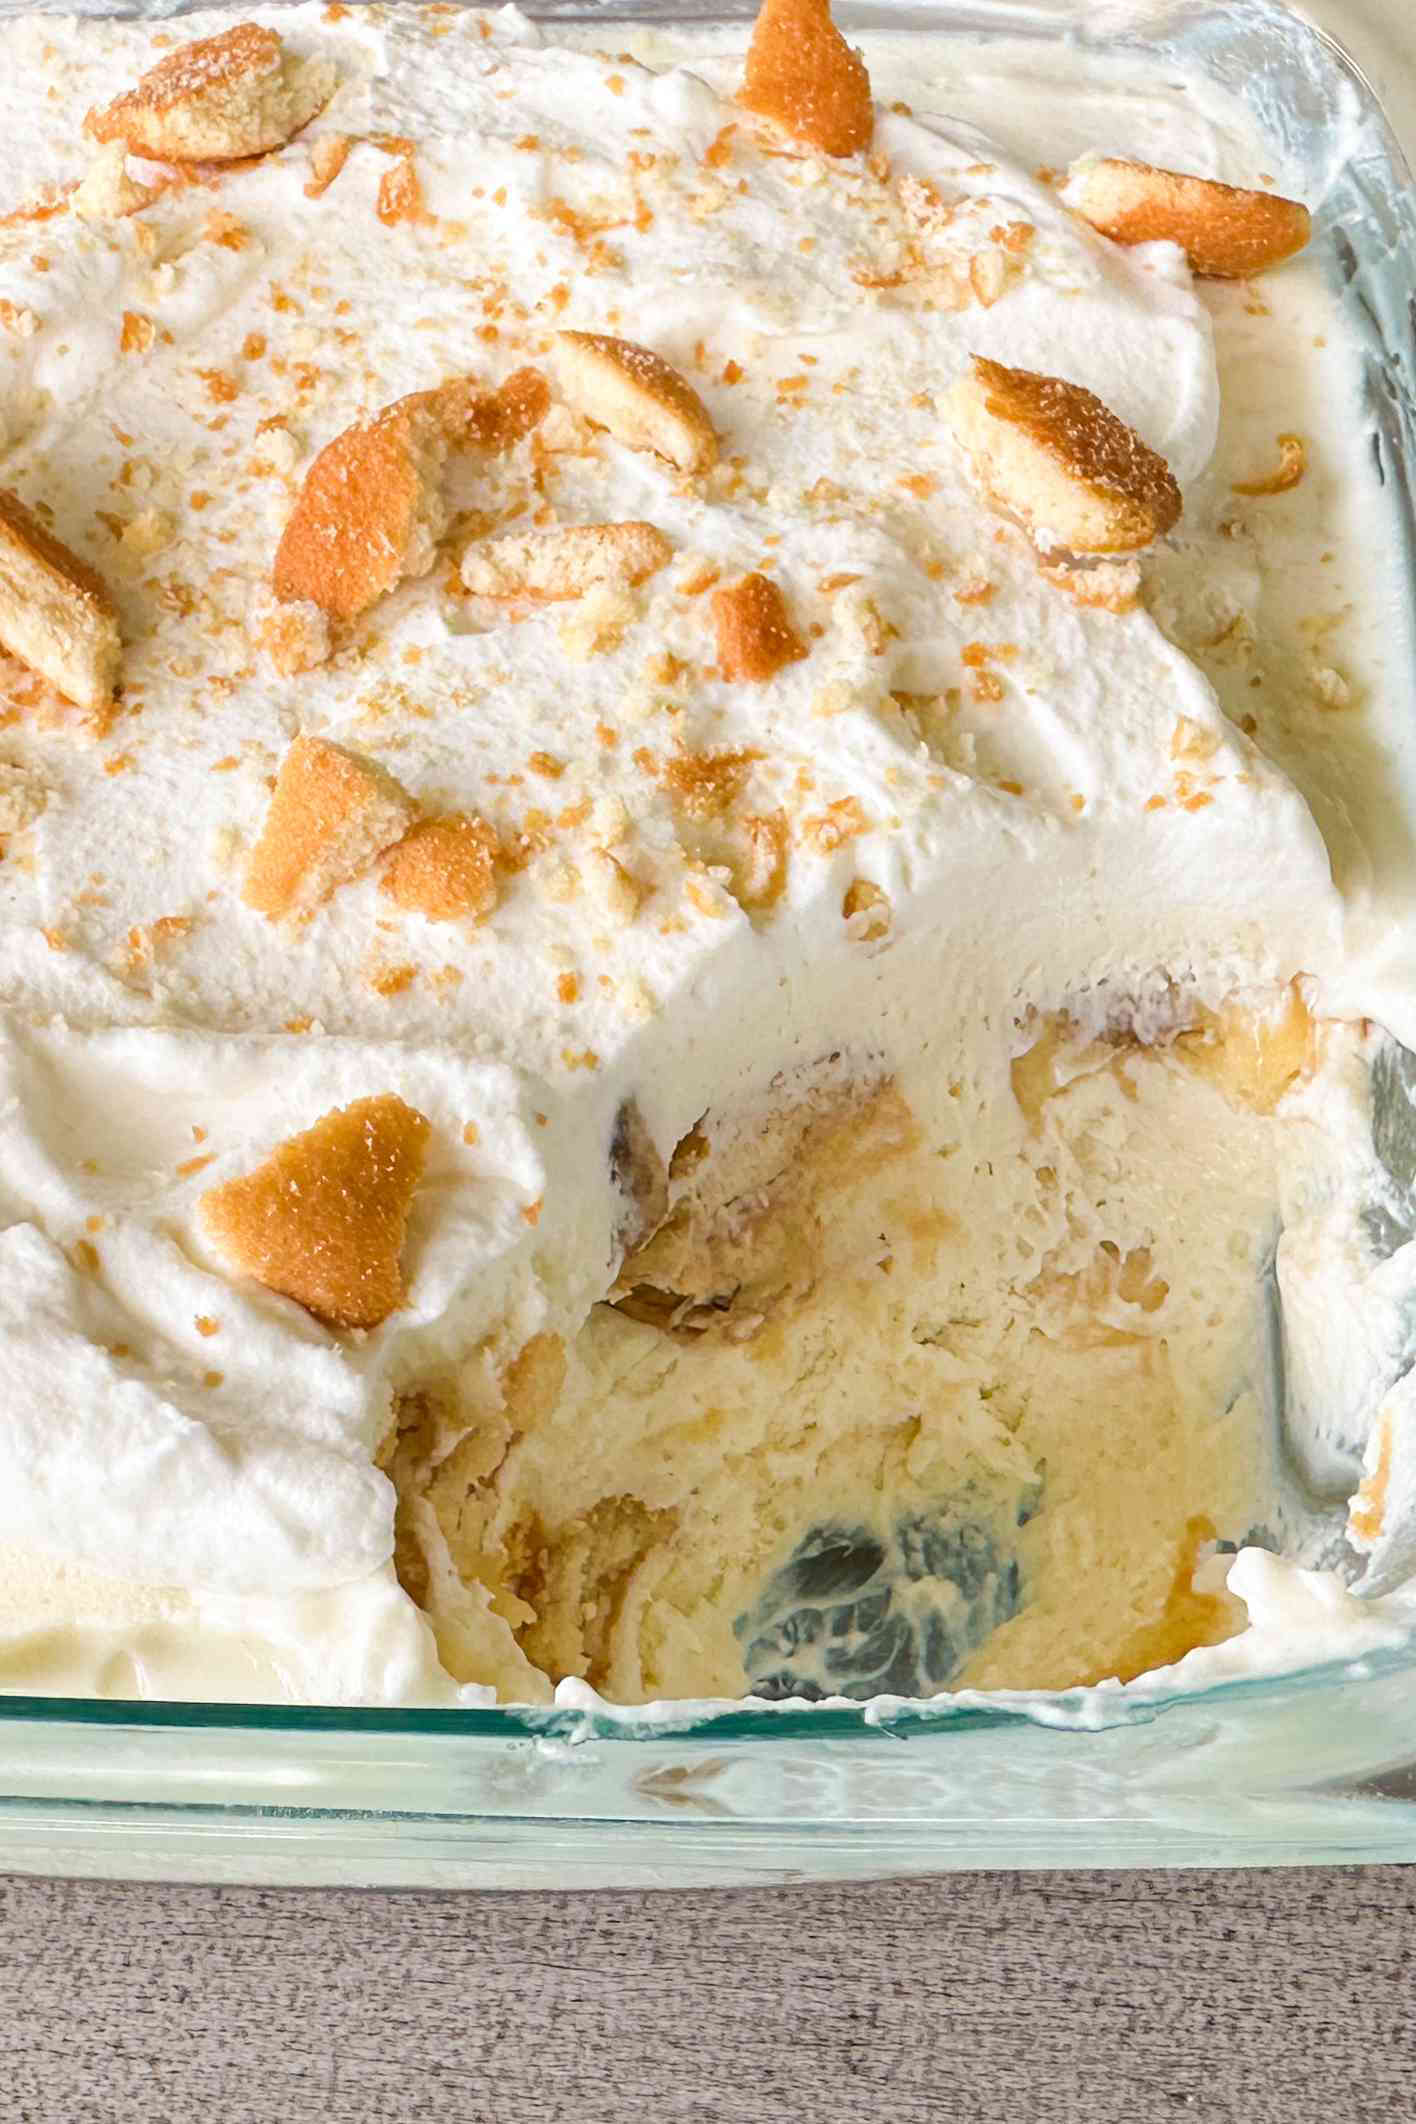 This Is the Best No-Cook Banana Pudding Recipe